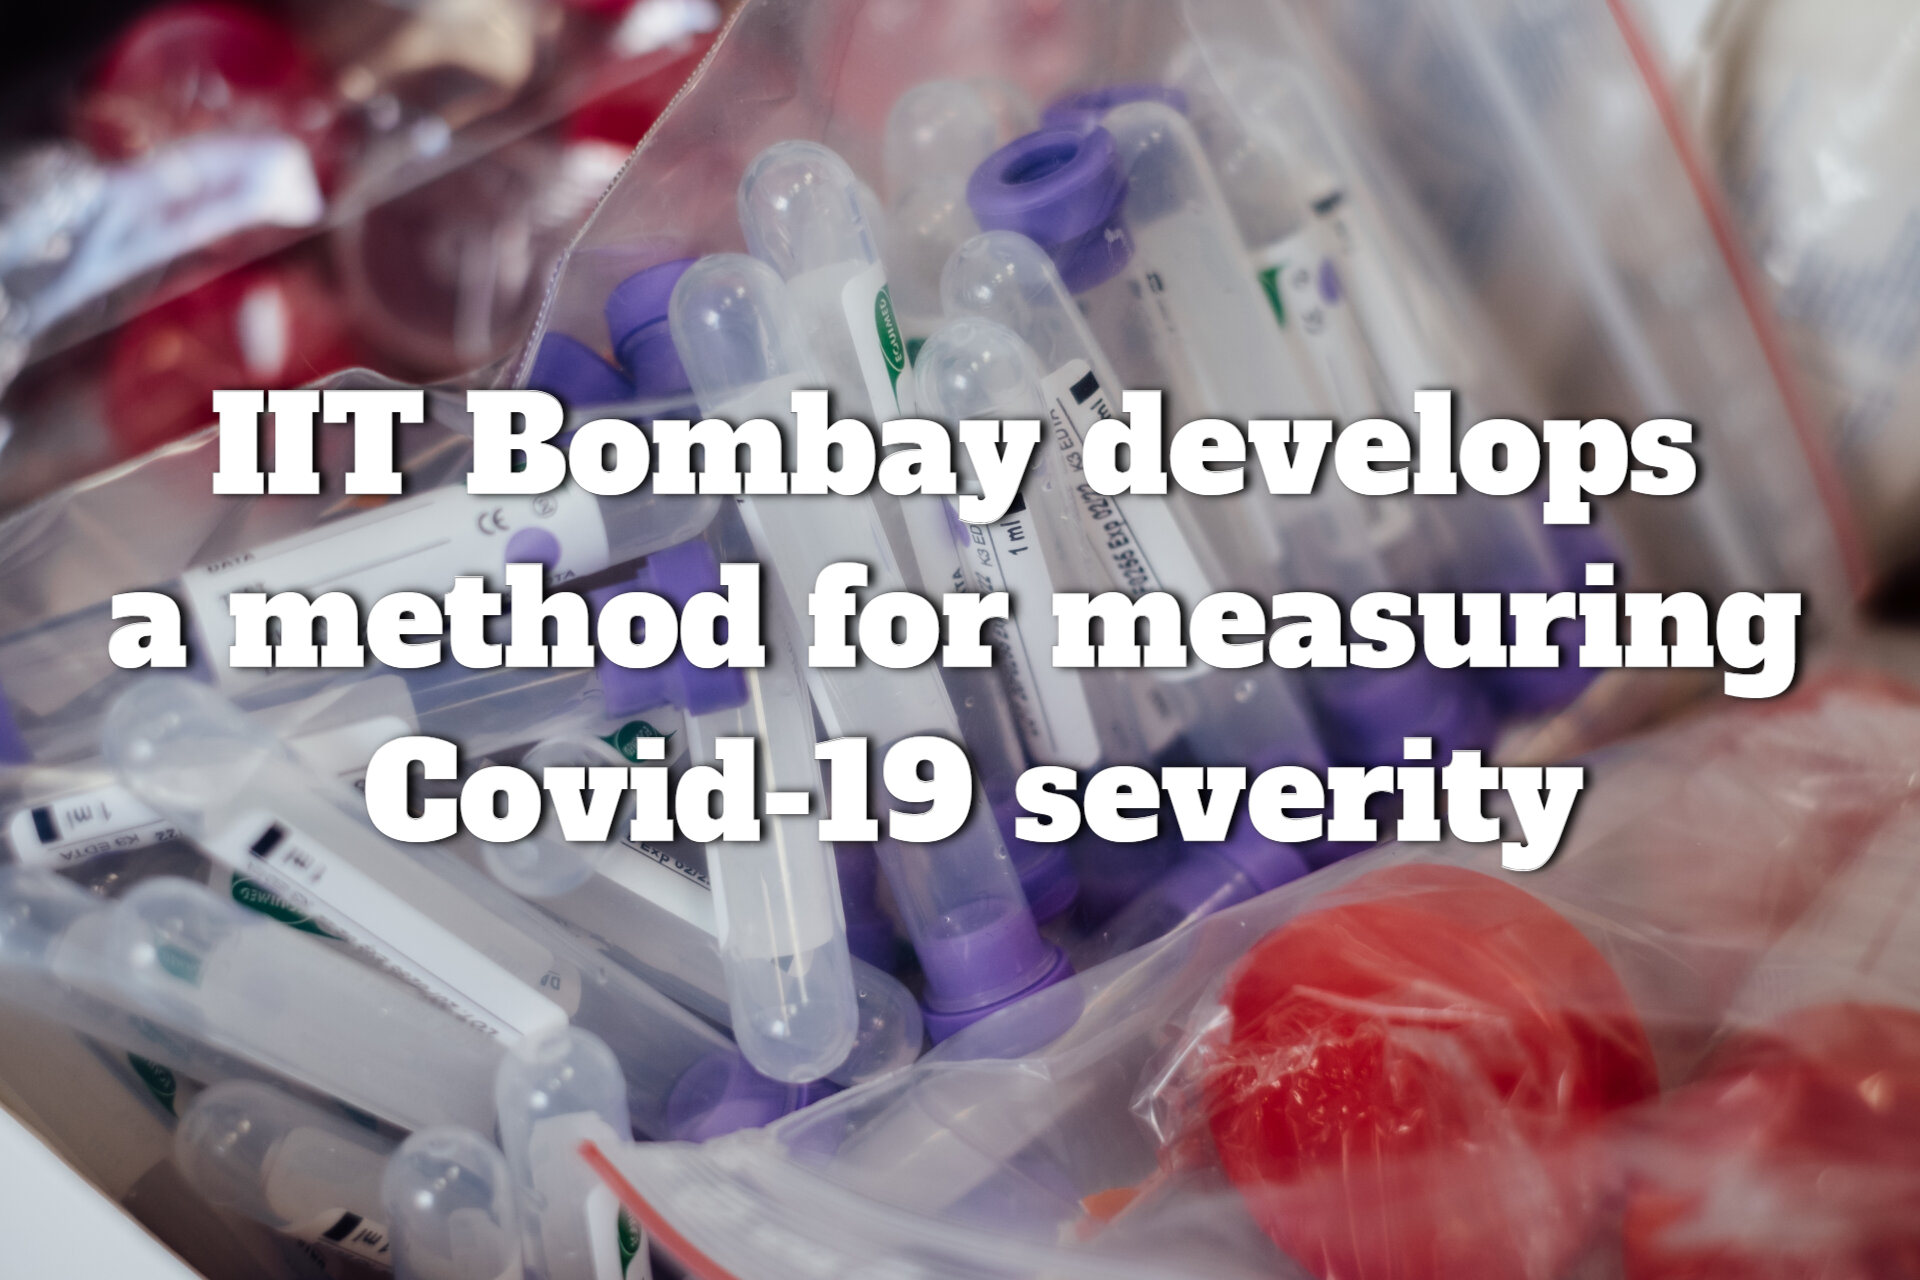 The IIT Bombay professor develops a method for measuring Covid-19 severity